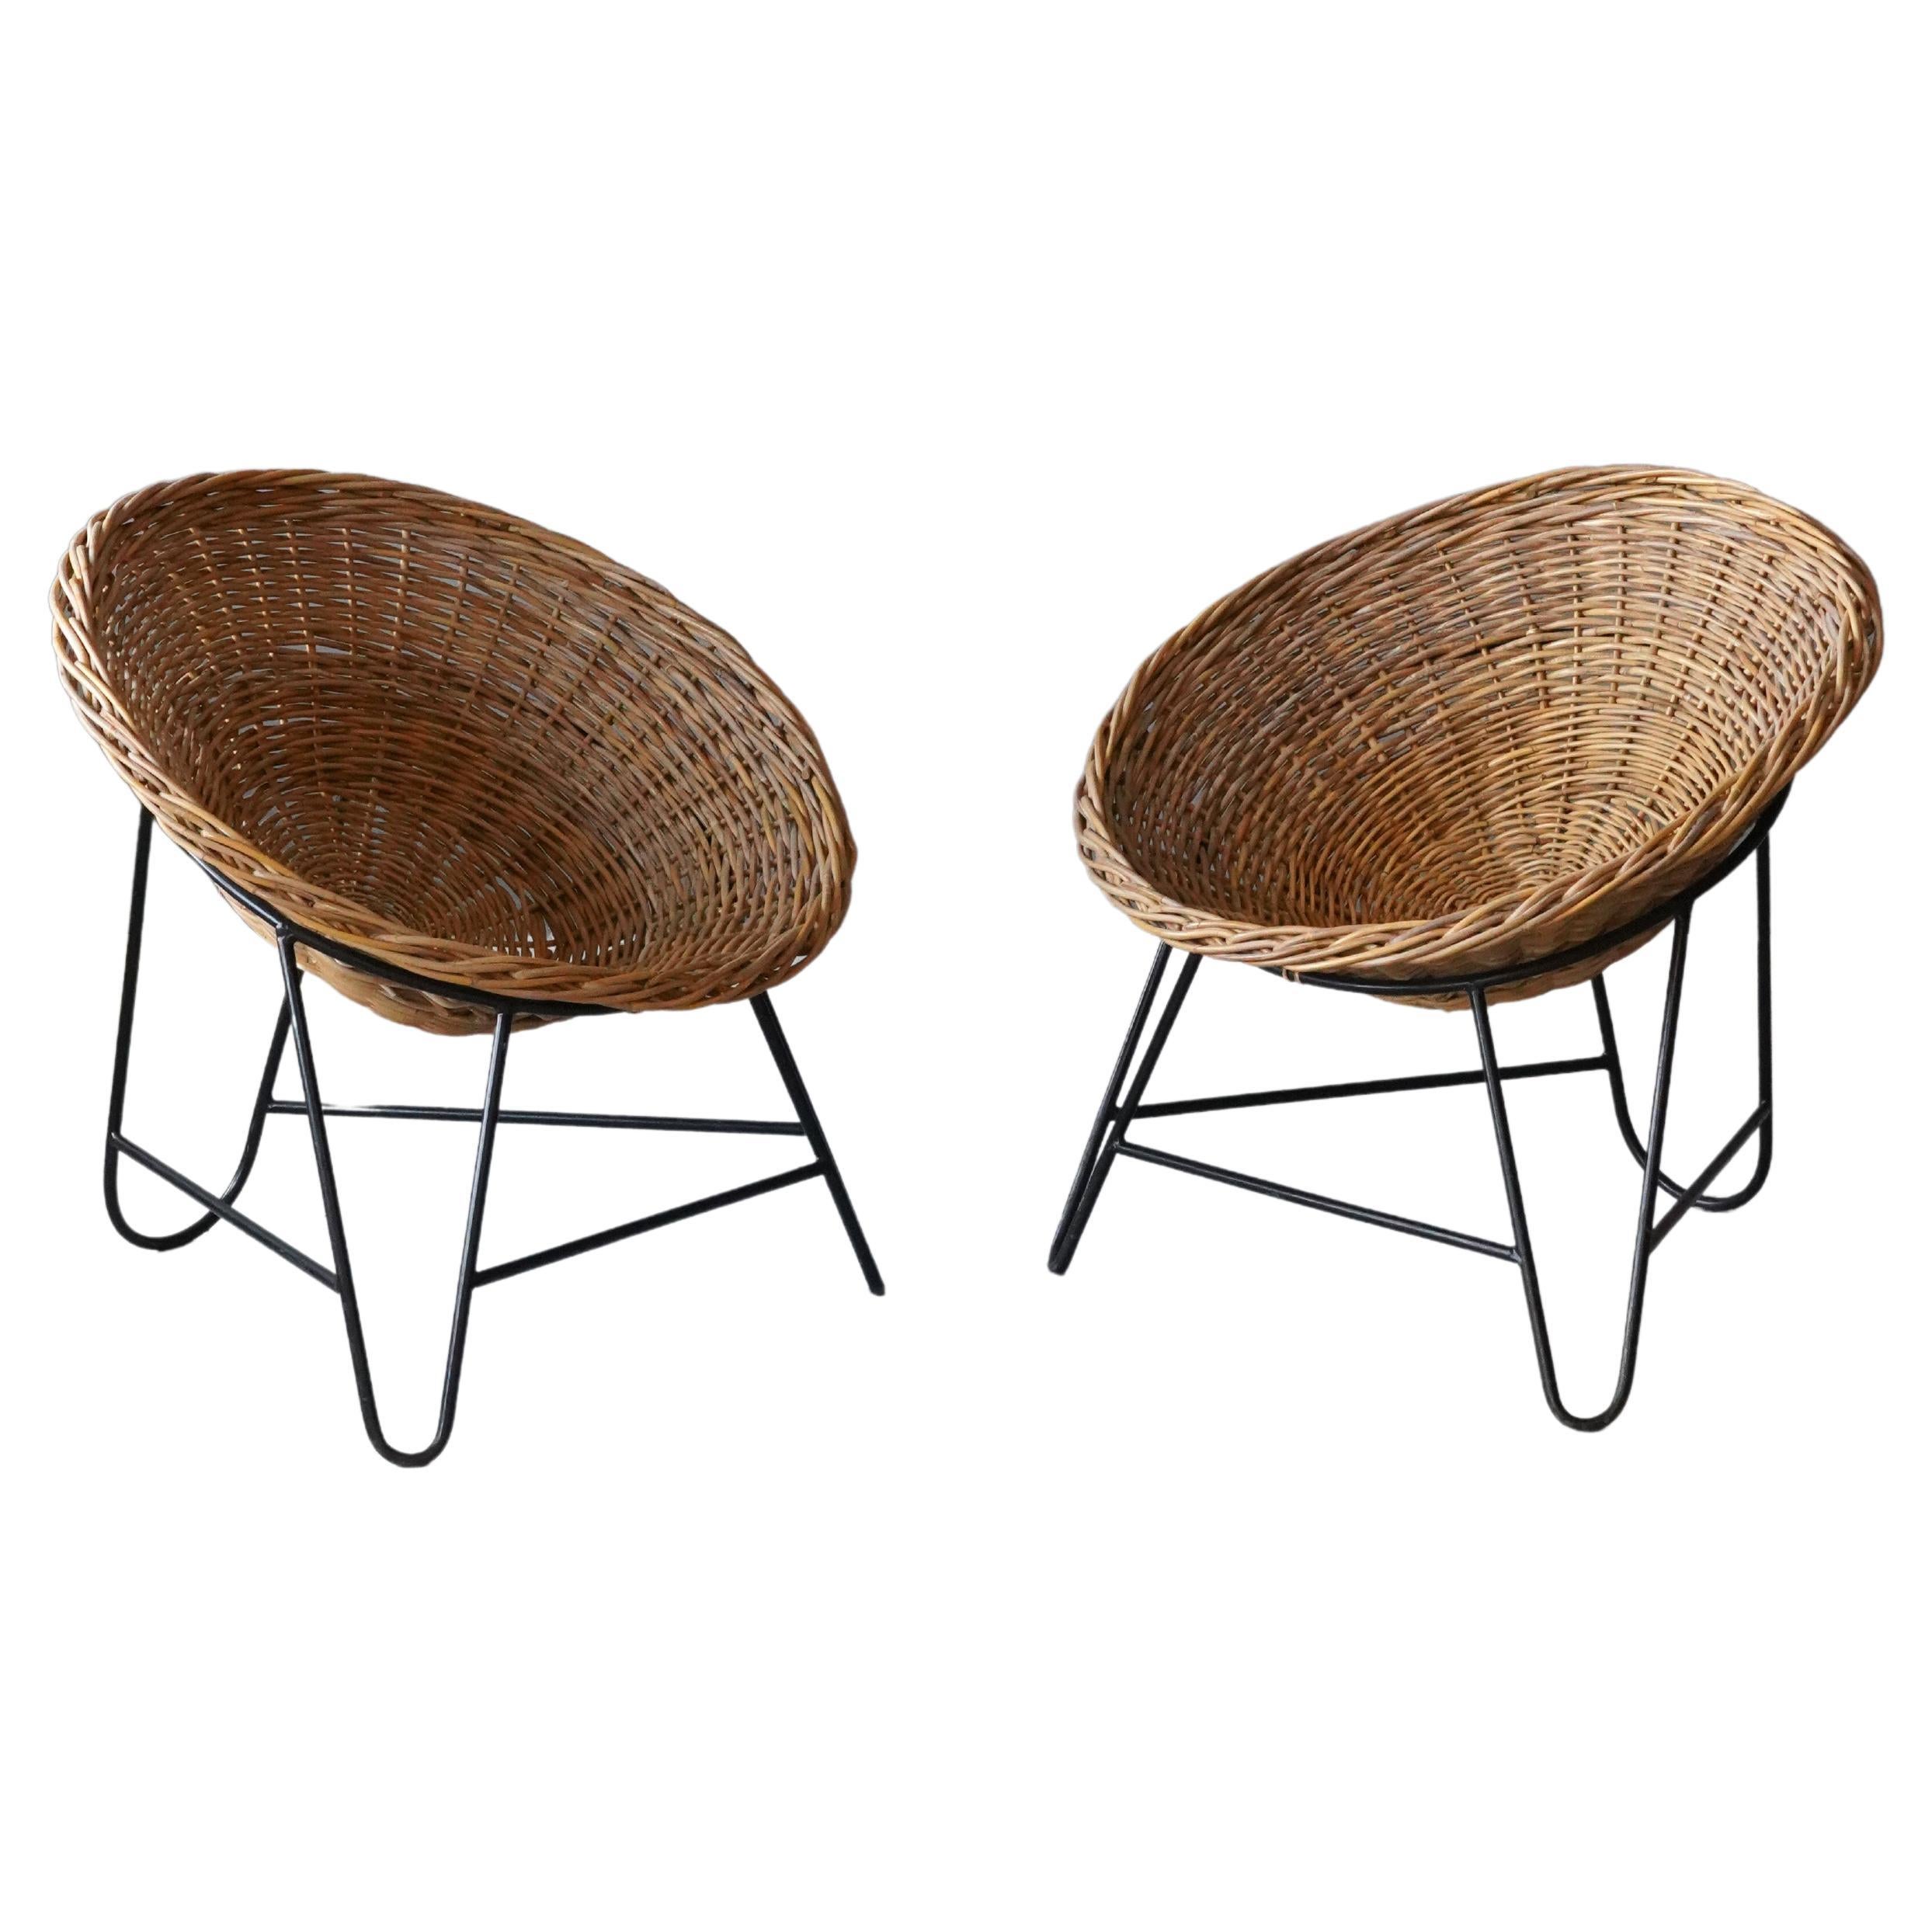 Italian, Lounge Chairs, Rattan, Black Lacquered Metal, Italy, 1960s